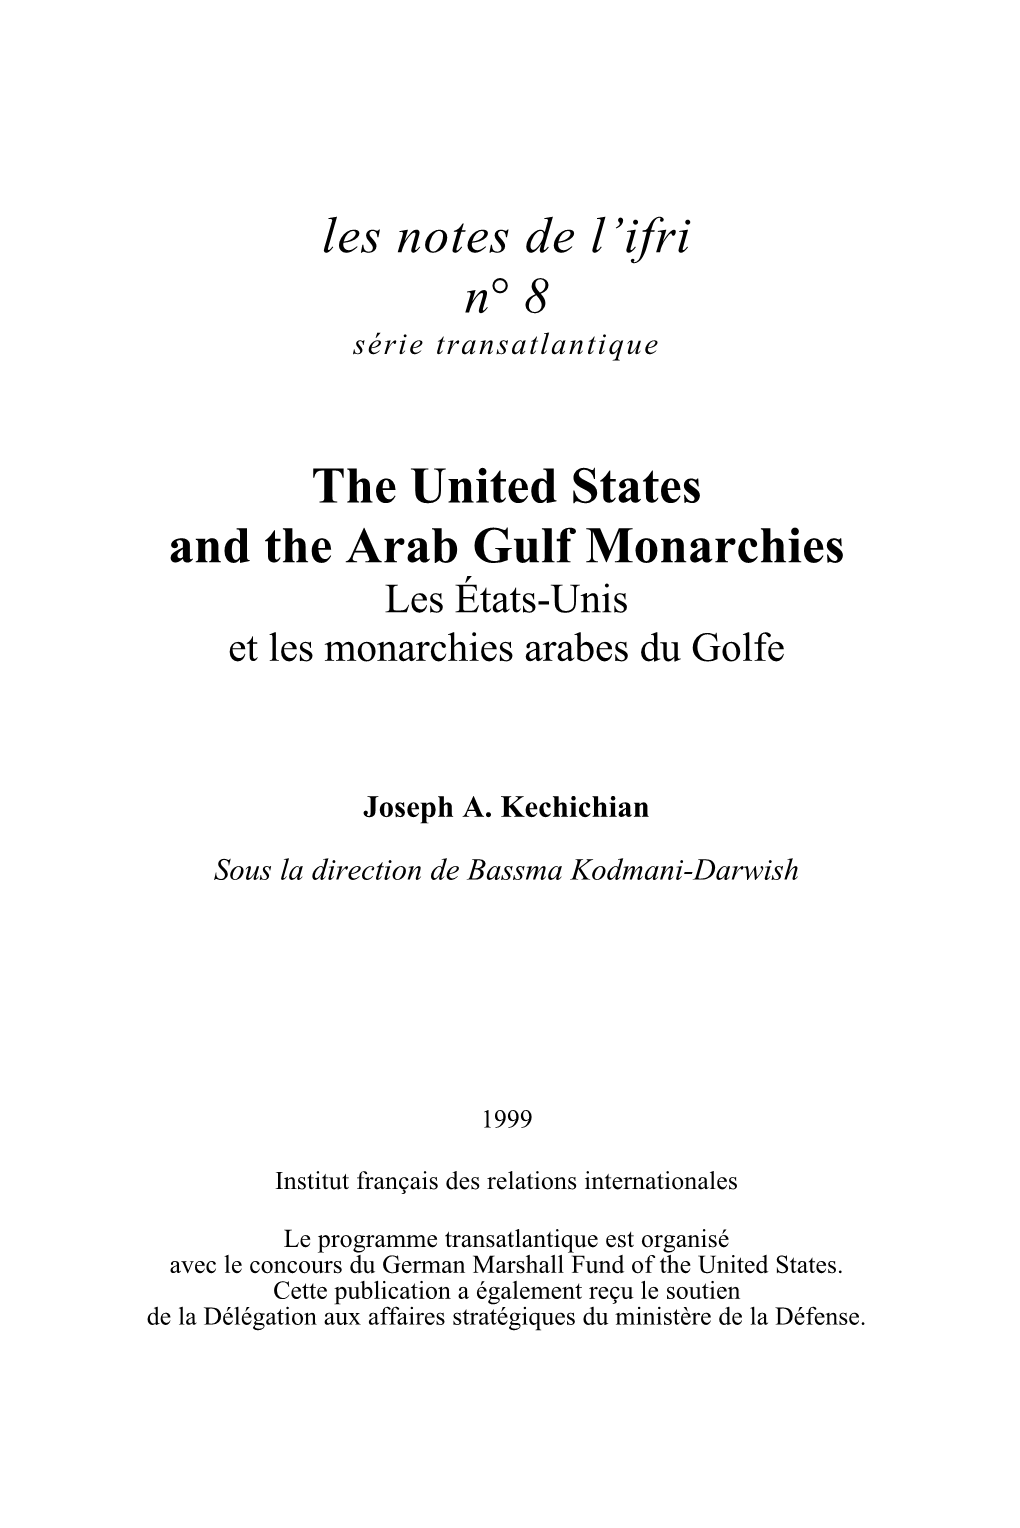 Les Notes De L'ifri N° 8 the United States and the Arab Gulf Monarchies